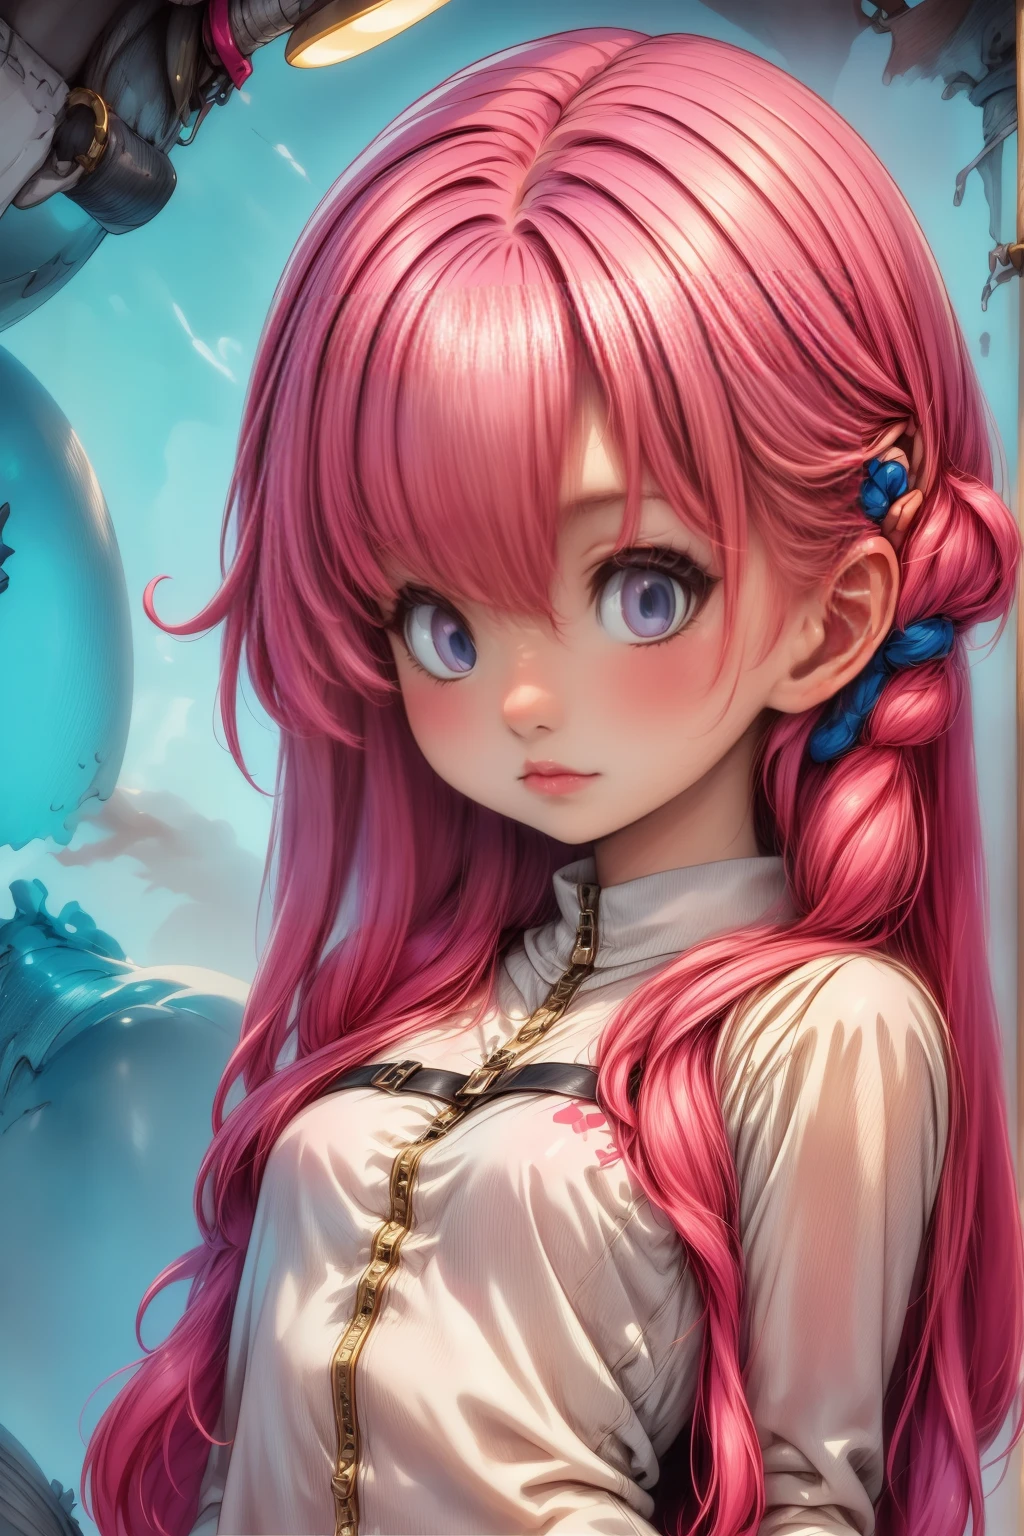 plano general, cuerpo entero, Anime:1.5, a girl with long pink hair, beautiful detailed eyes, beautiful detailed lips, extremely detailed face and eyes, long eyelashes, cinematic modern side-swept blush lighting, ray tracing, parallel shadow, wide shot, high detail, textured skin, 4k best quality, photorealistic, vivid colors, masterpiece, digital art